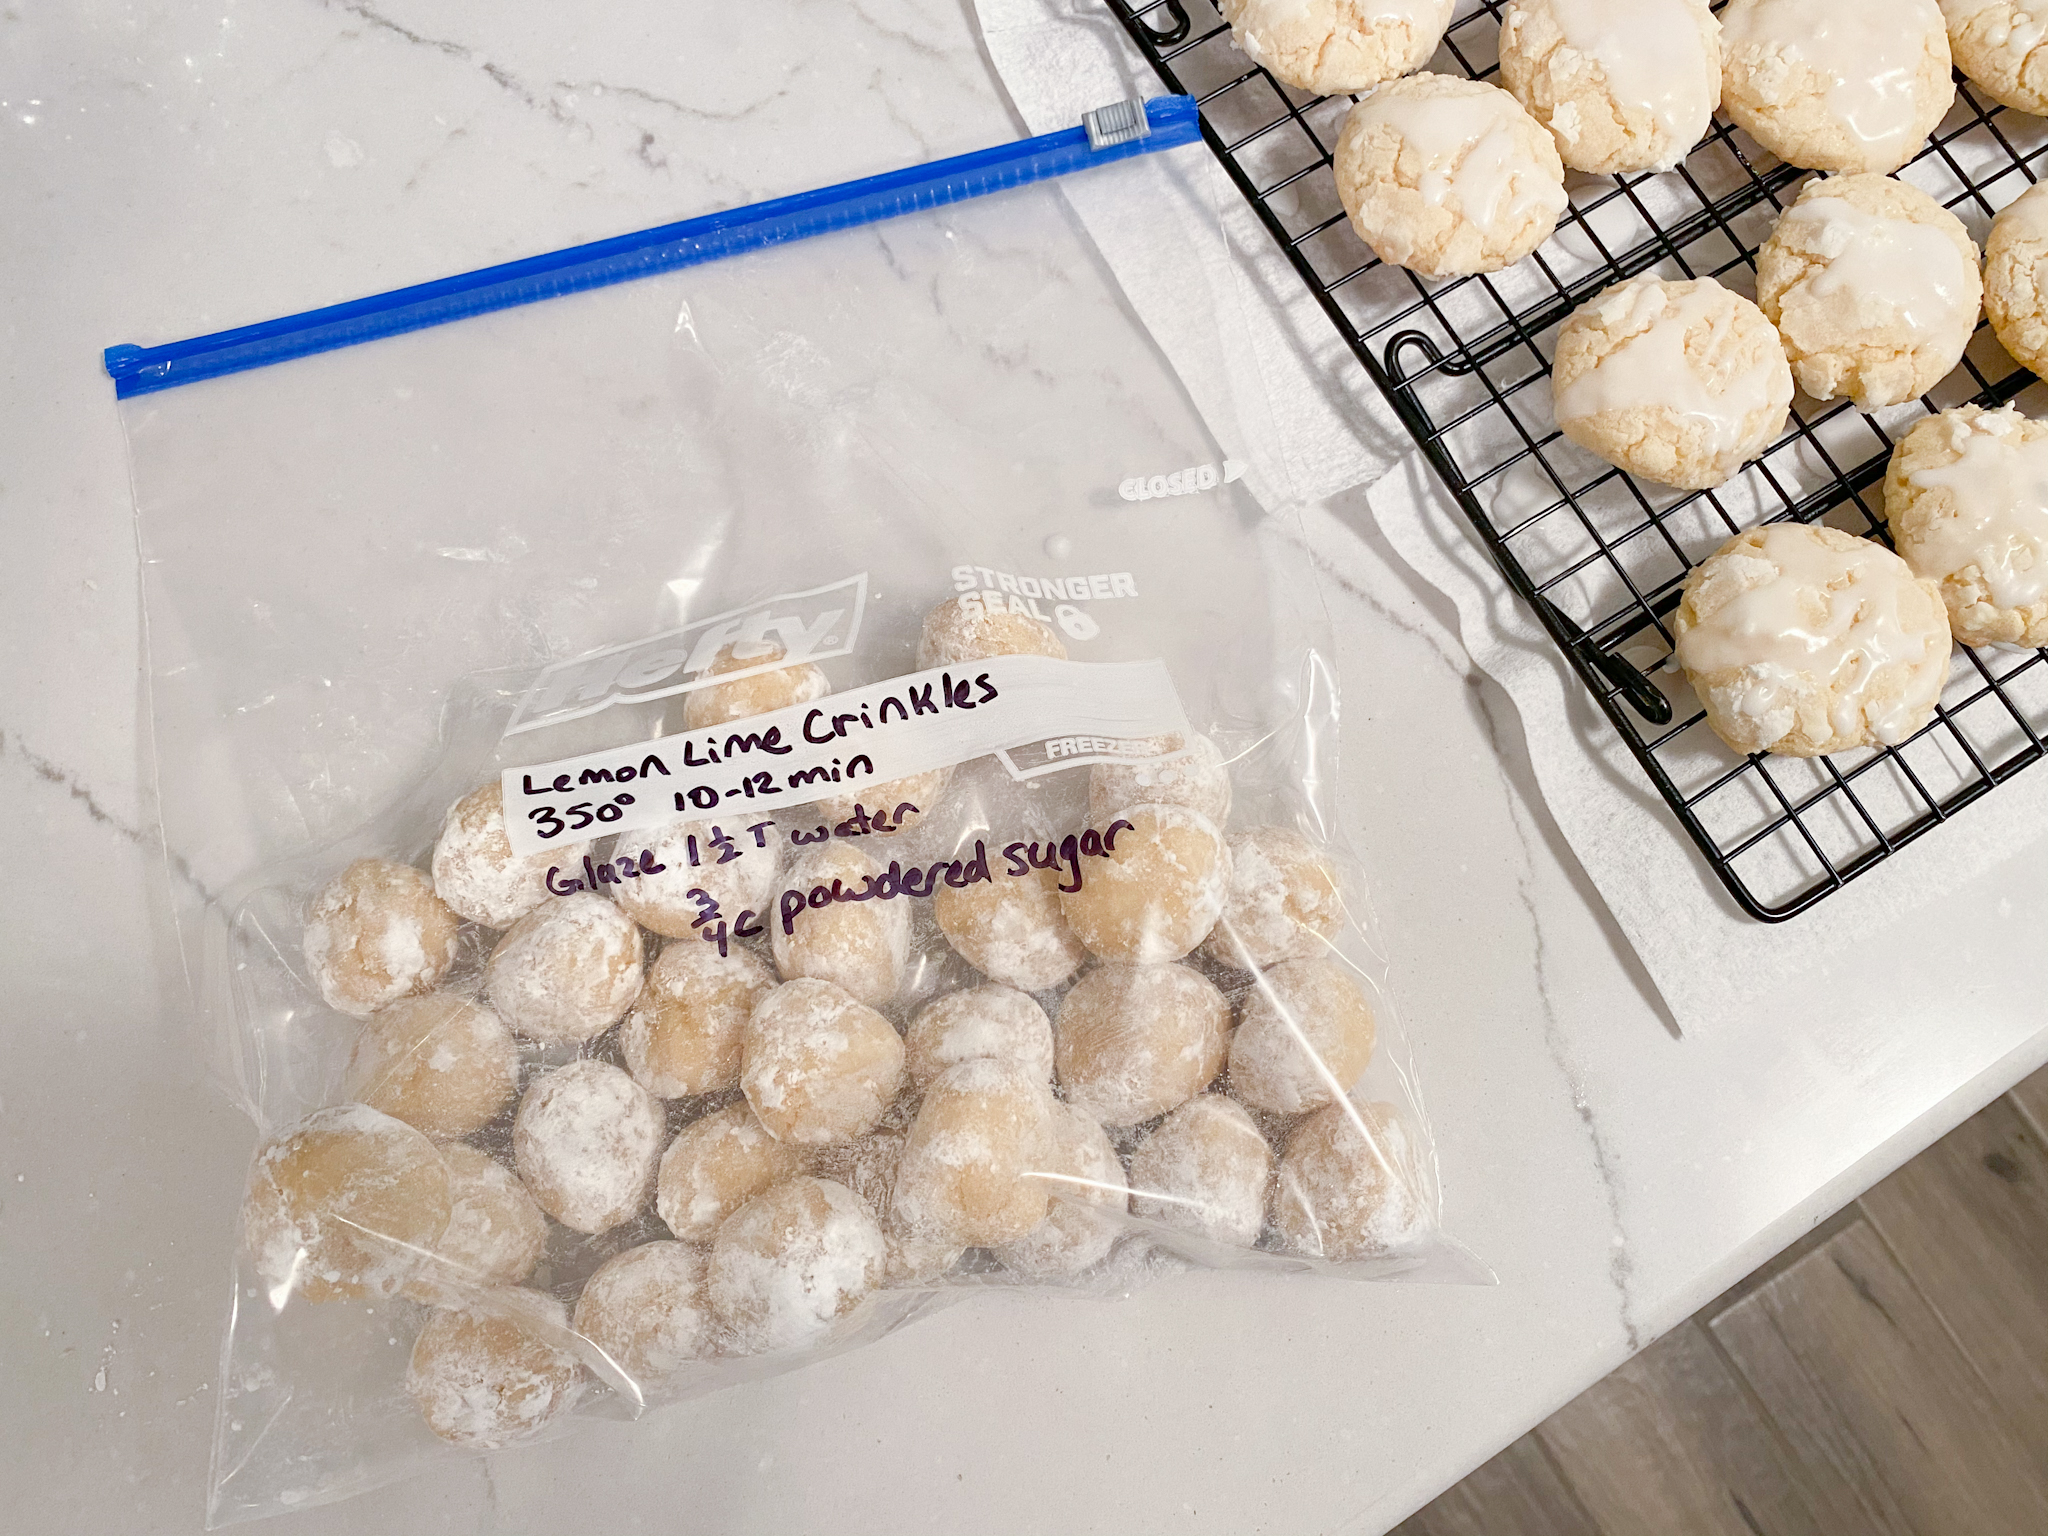 Zippered freezer bag of lemon lime cookie dough balls labeled with 350 degrees 10-12 minutes and Glaze 1 1/2 Tbsp water 3/4 cup powdered sugar